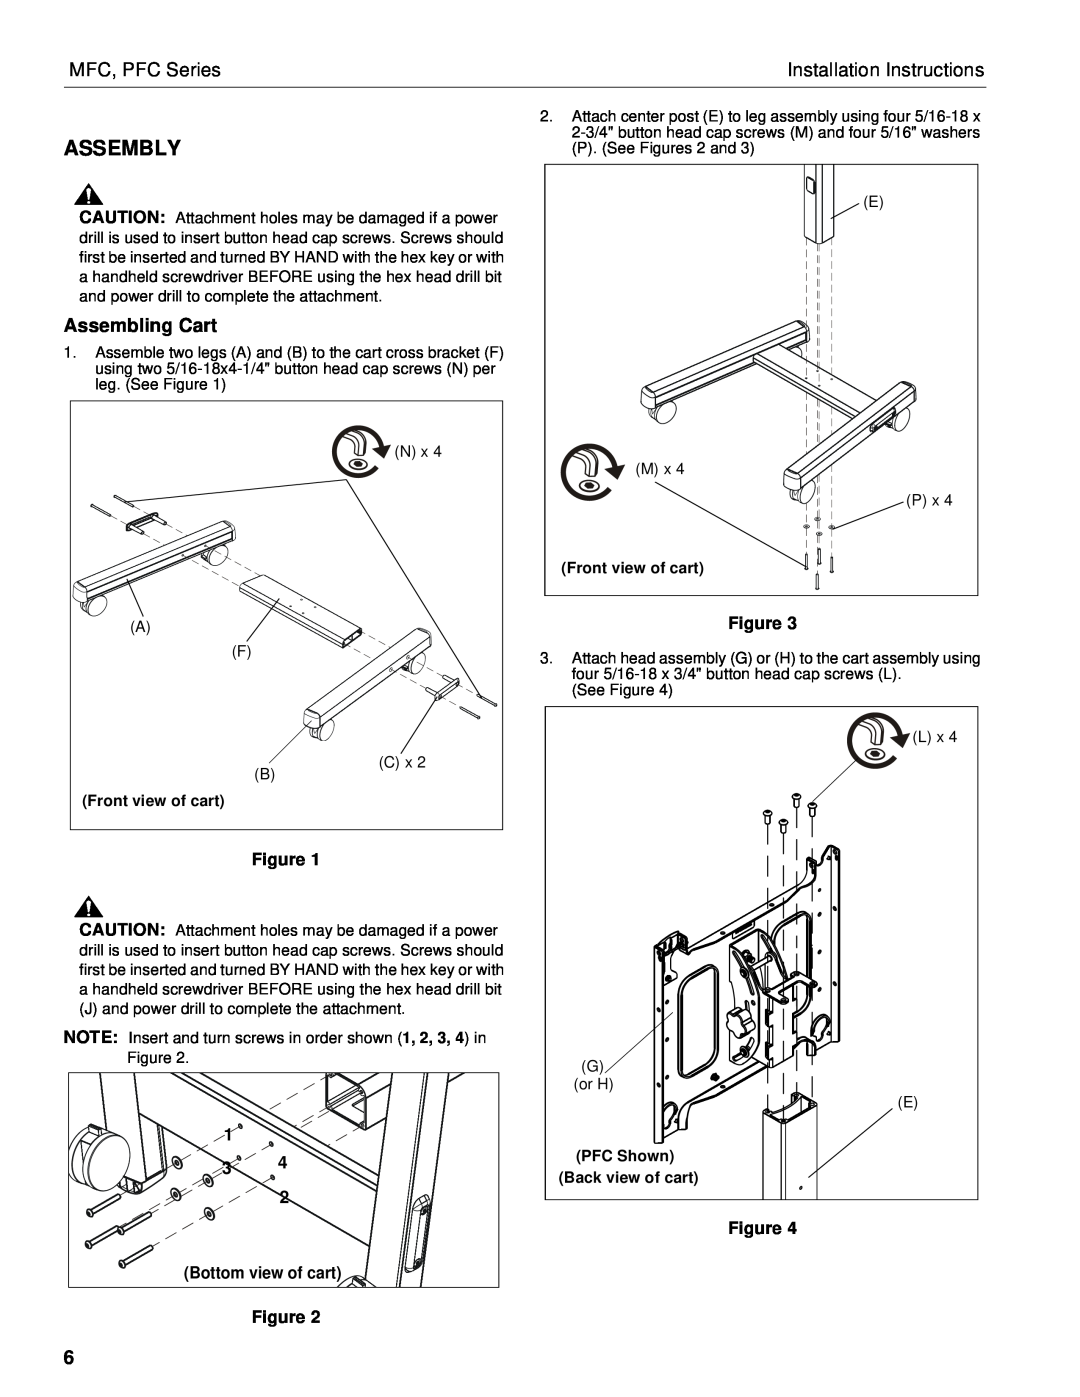 Chief Manufacturing MFC Series Assembly, Assembling Cart, 1 3 2 Bottom view of cart Figure, MFC, PFC Series 